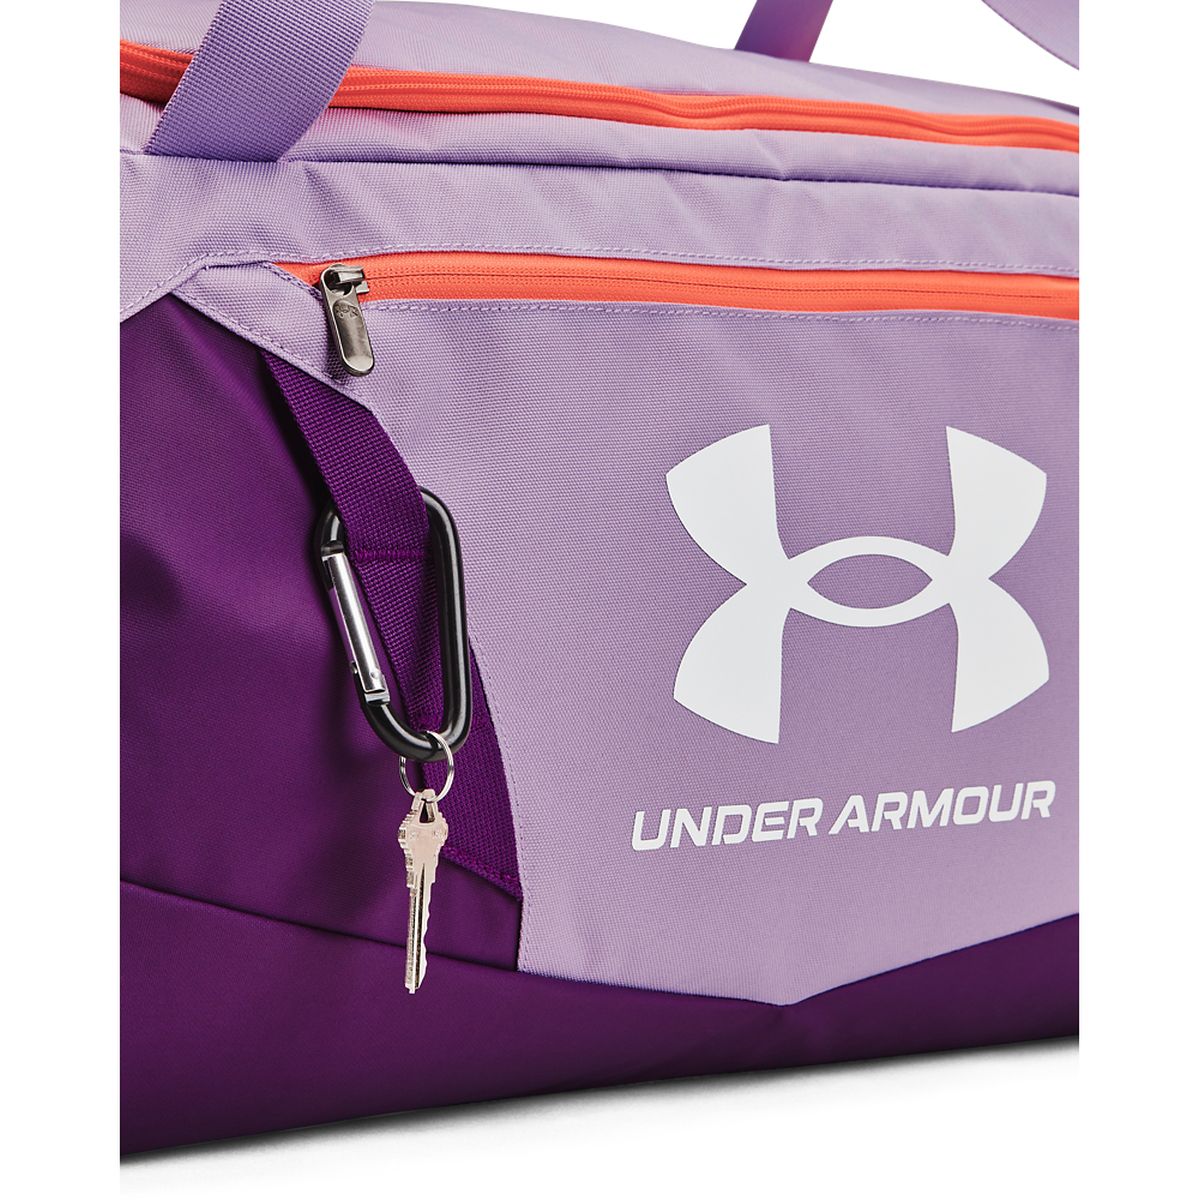 Under Armour UA Undeniable 5.0 Duffle Md Tasche_4